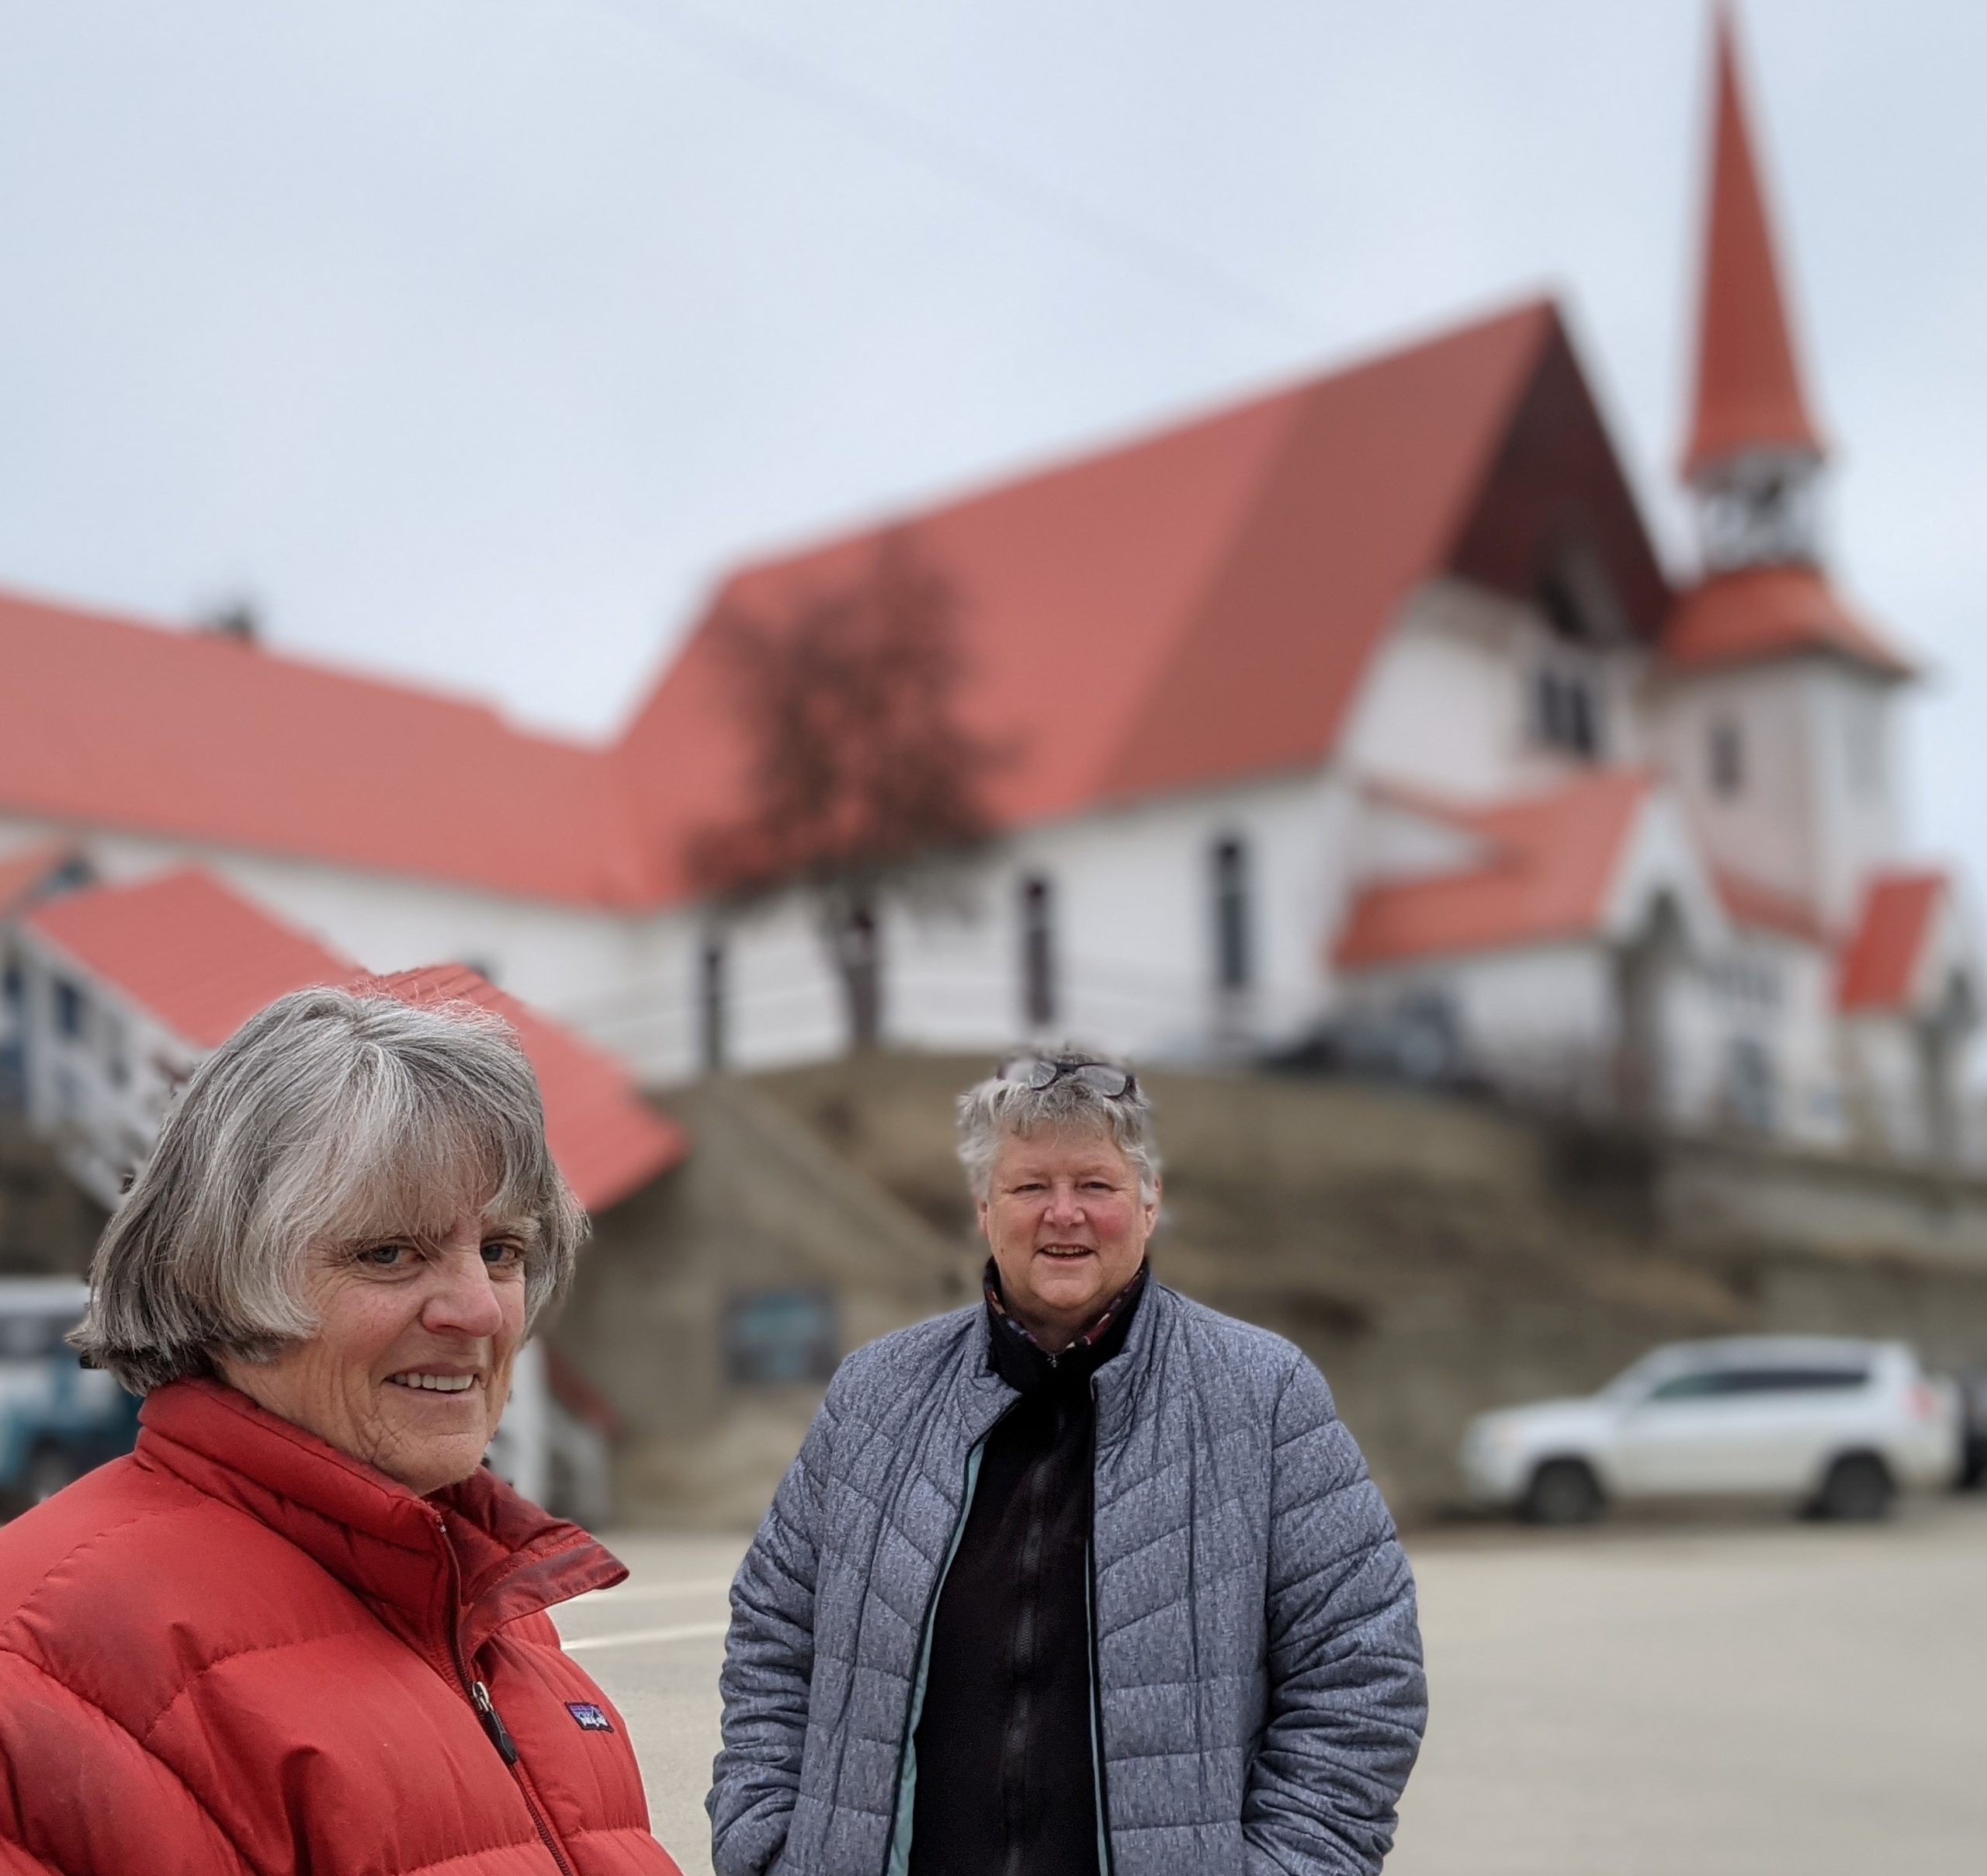 100K to secure 100-year future for Iconic Rossland Church:  Community Spirit required!